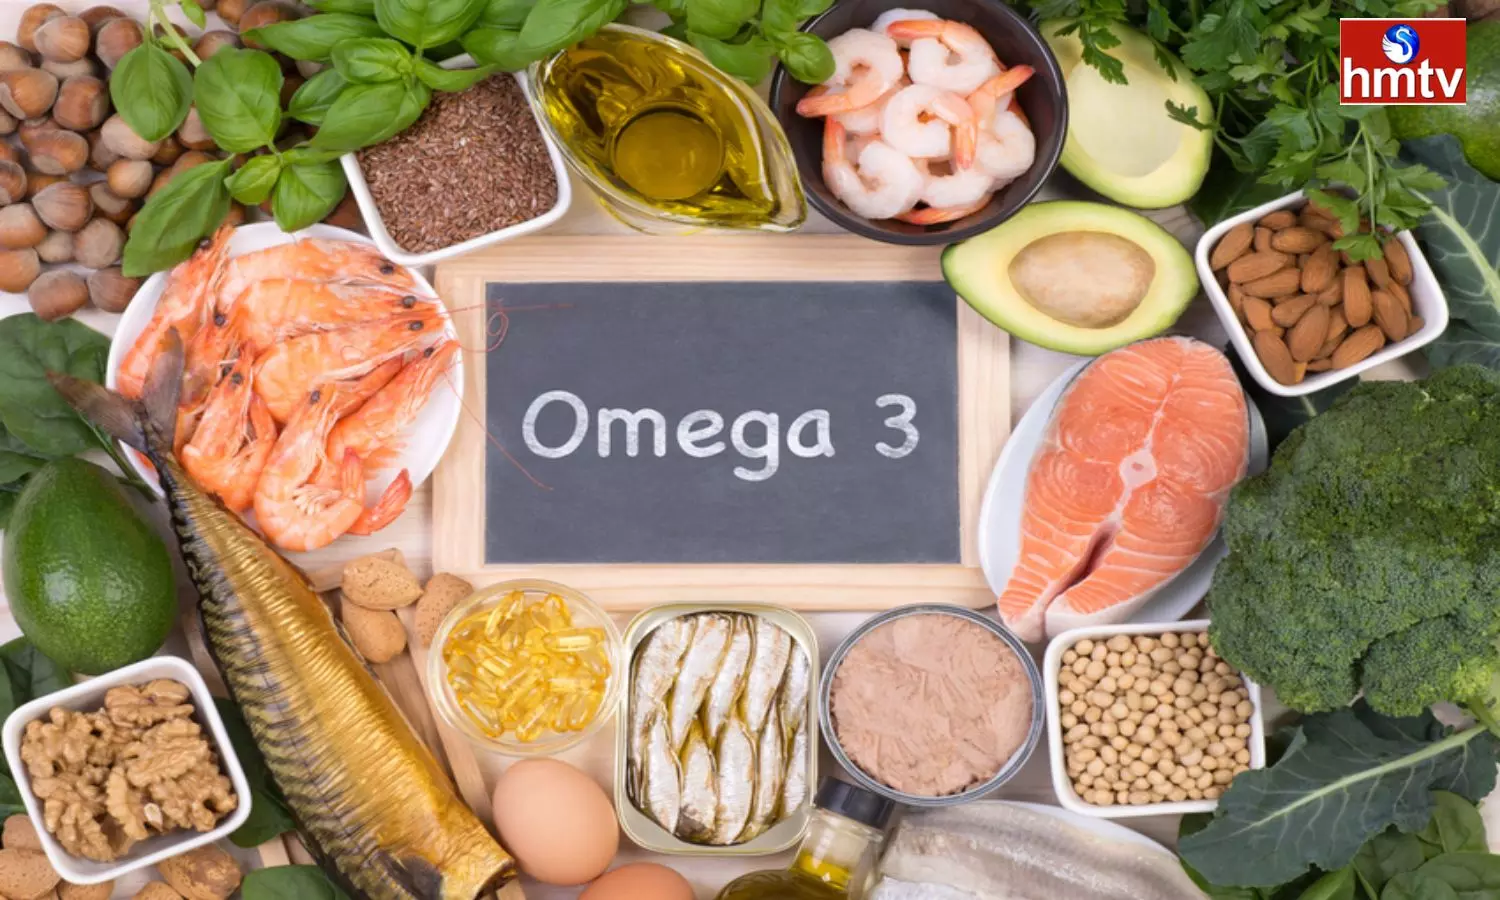 Deficiency Of Omega 3 In The Body Is Very Dangerous Include These In The Diet